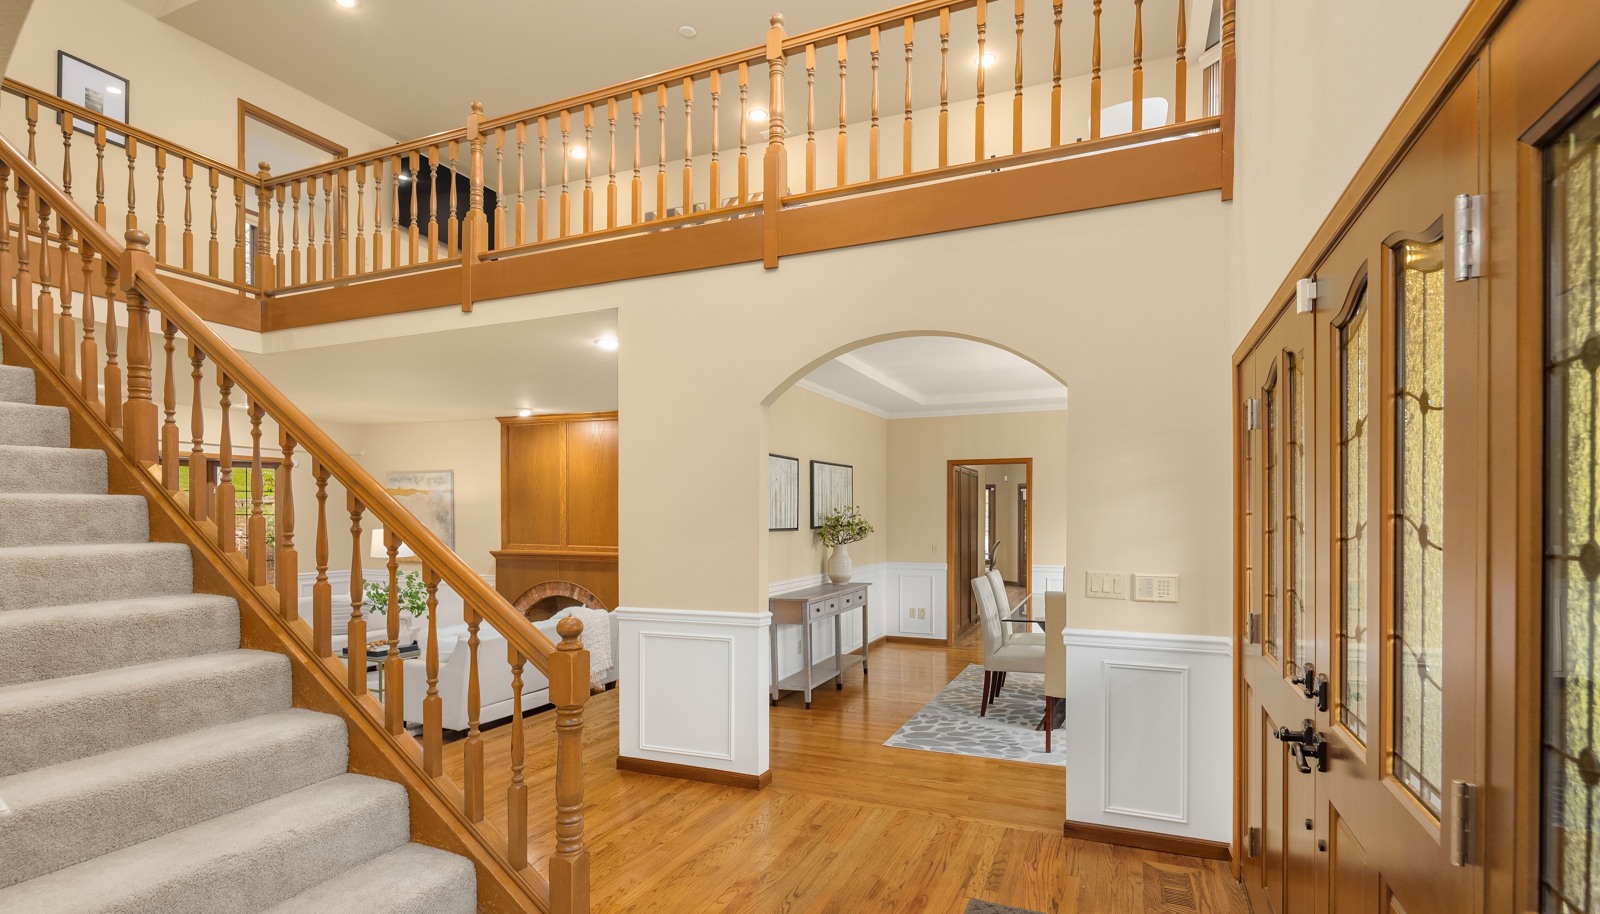 Grand entry with flowing hardwood floors.